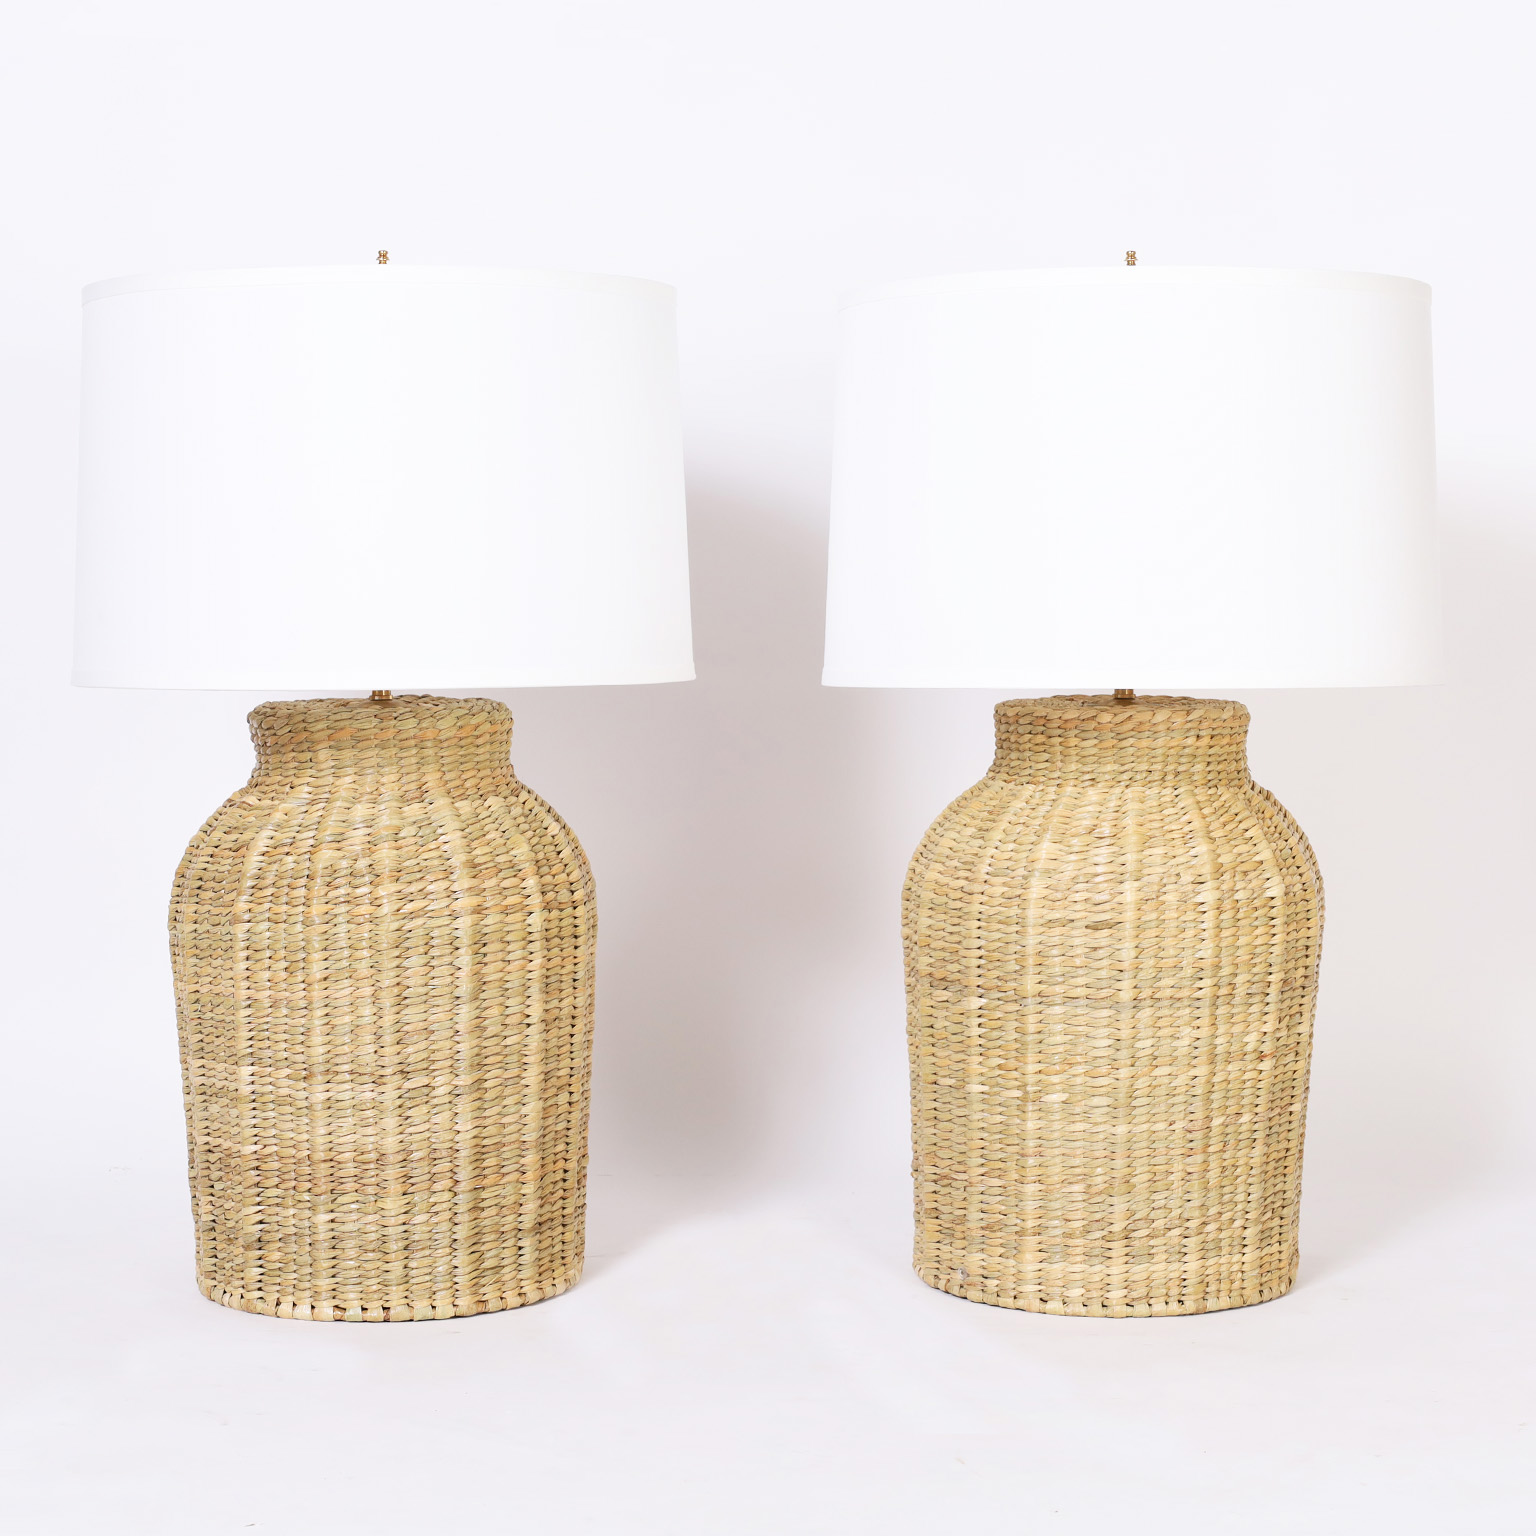 Pair of Wicker Bottle Form Table Lamps from the FS Flores Collection